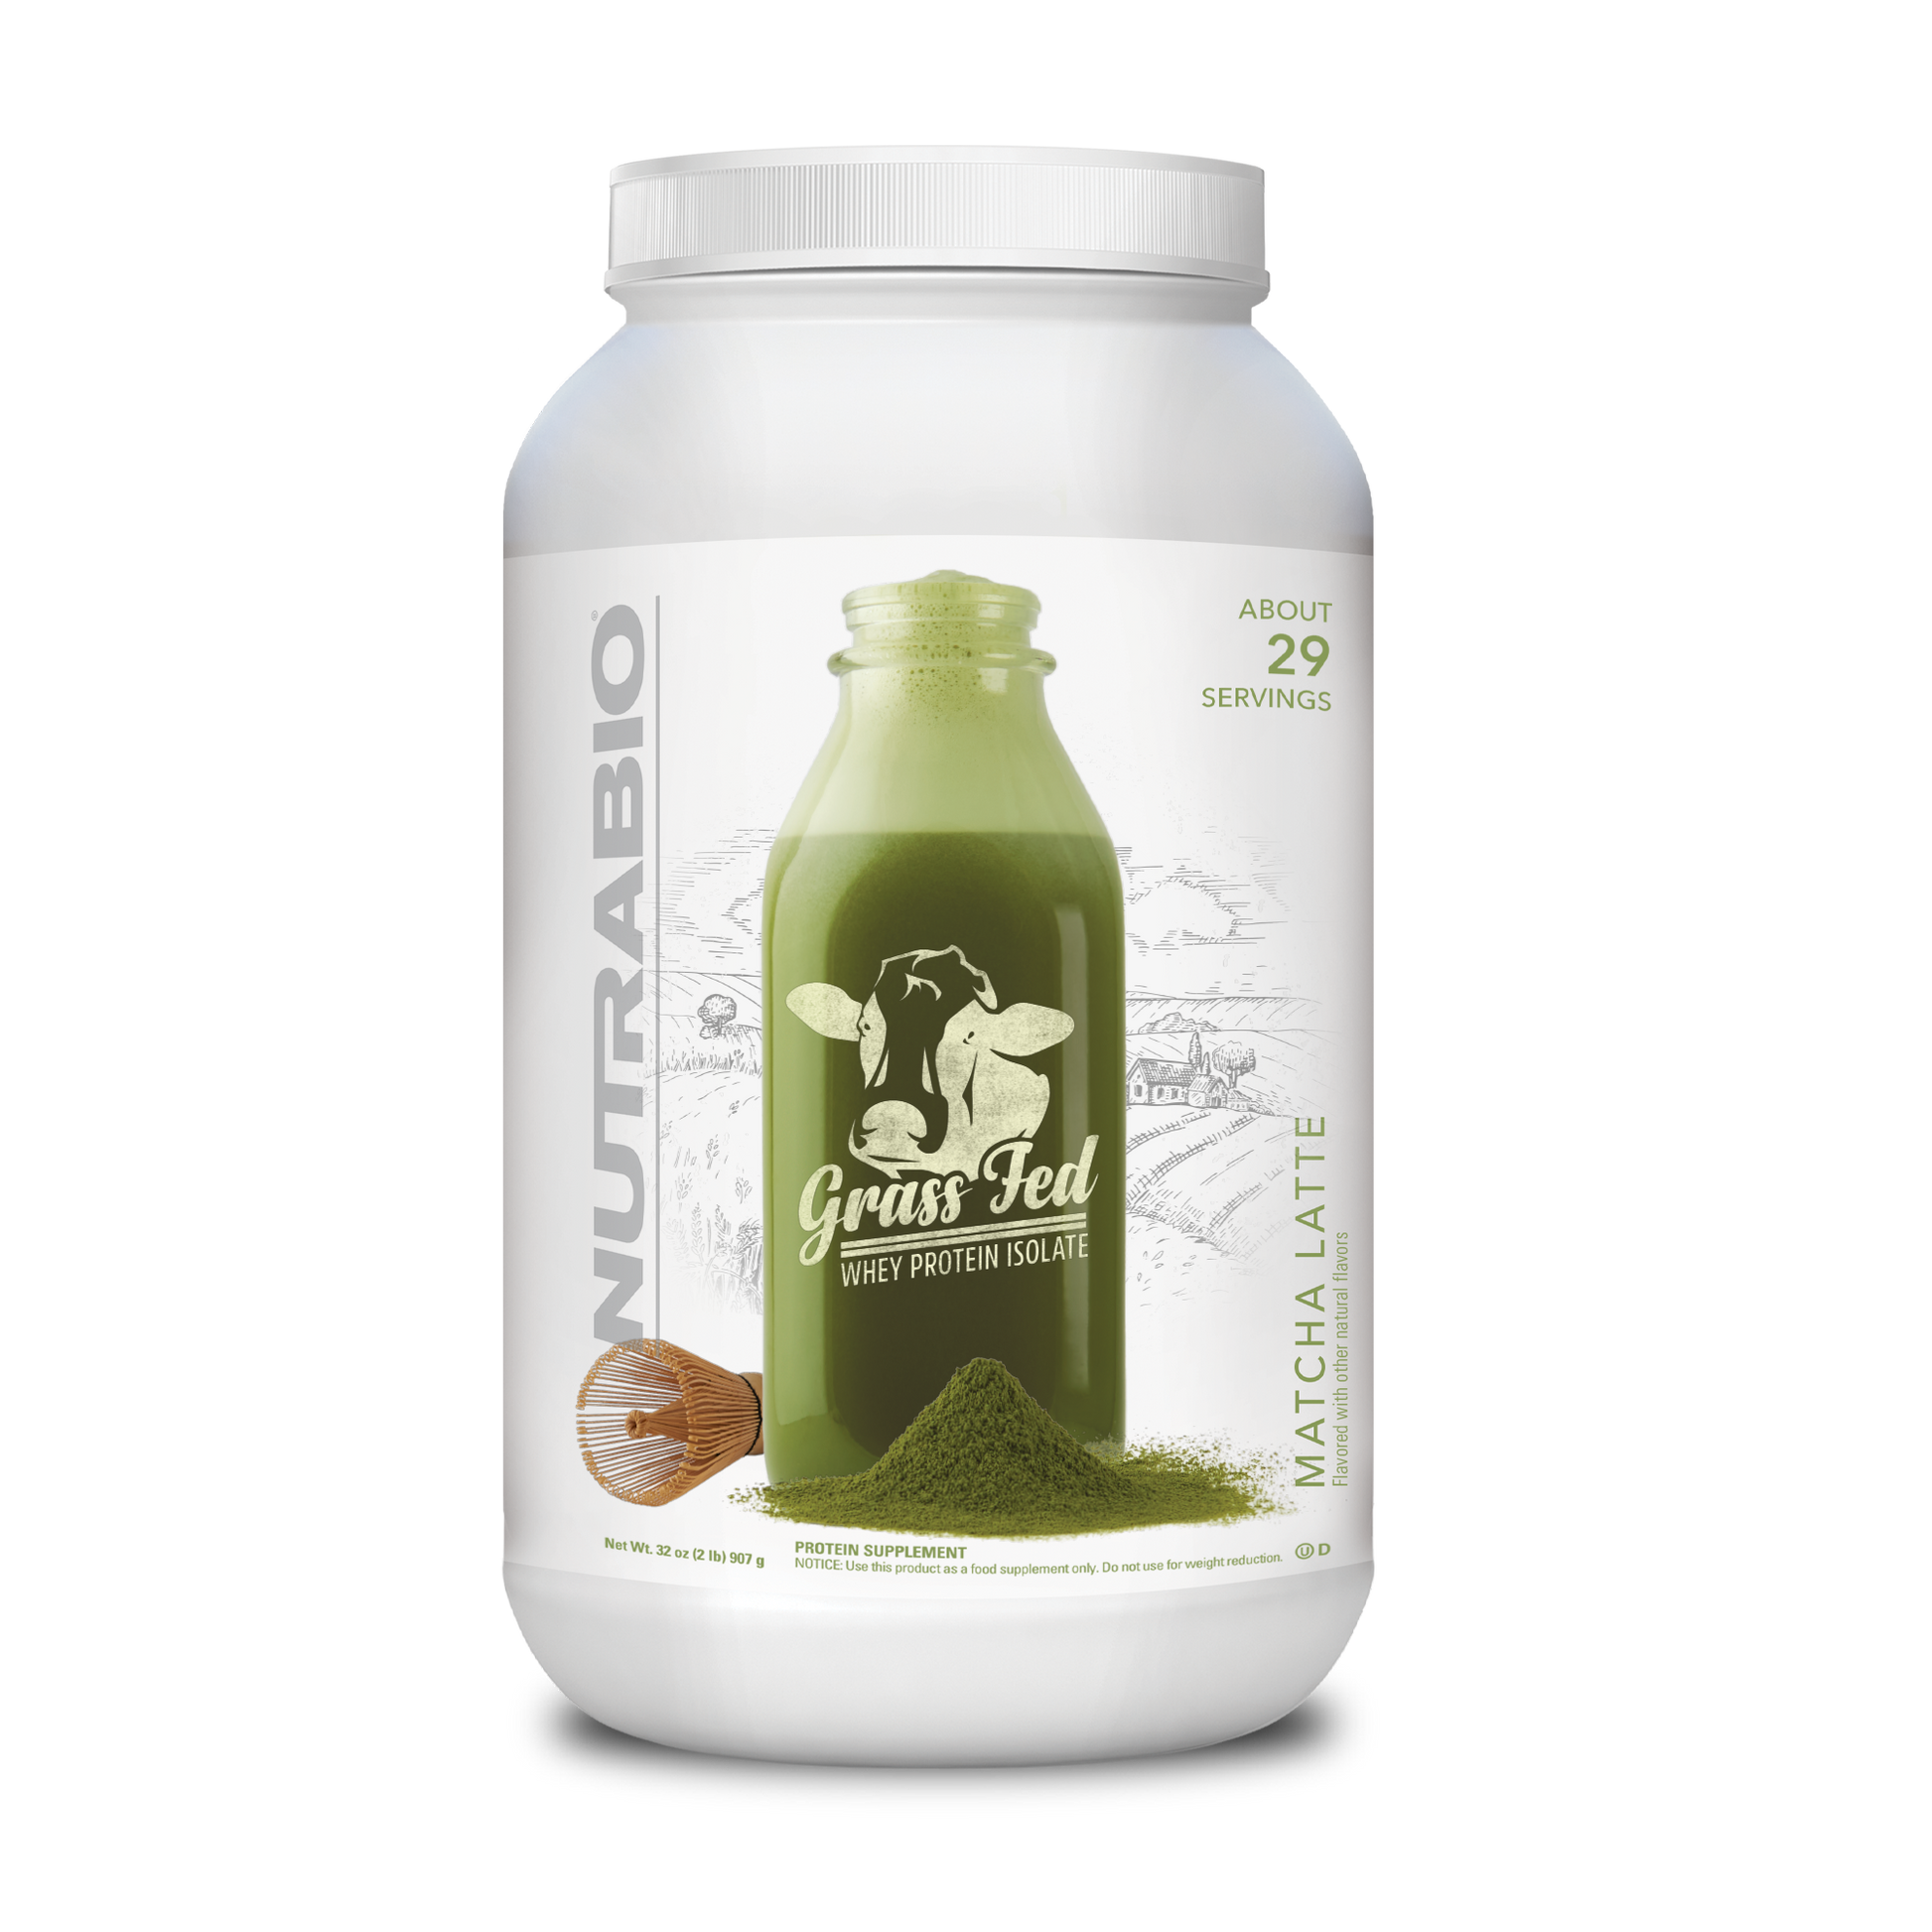 Grass Fed Whey Protein Isolate Matcha Latte